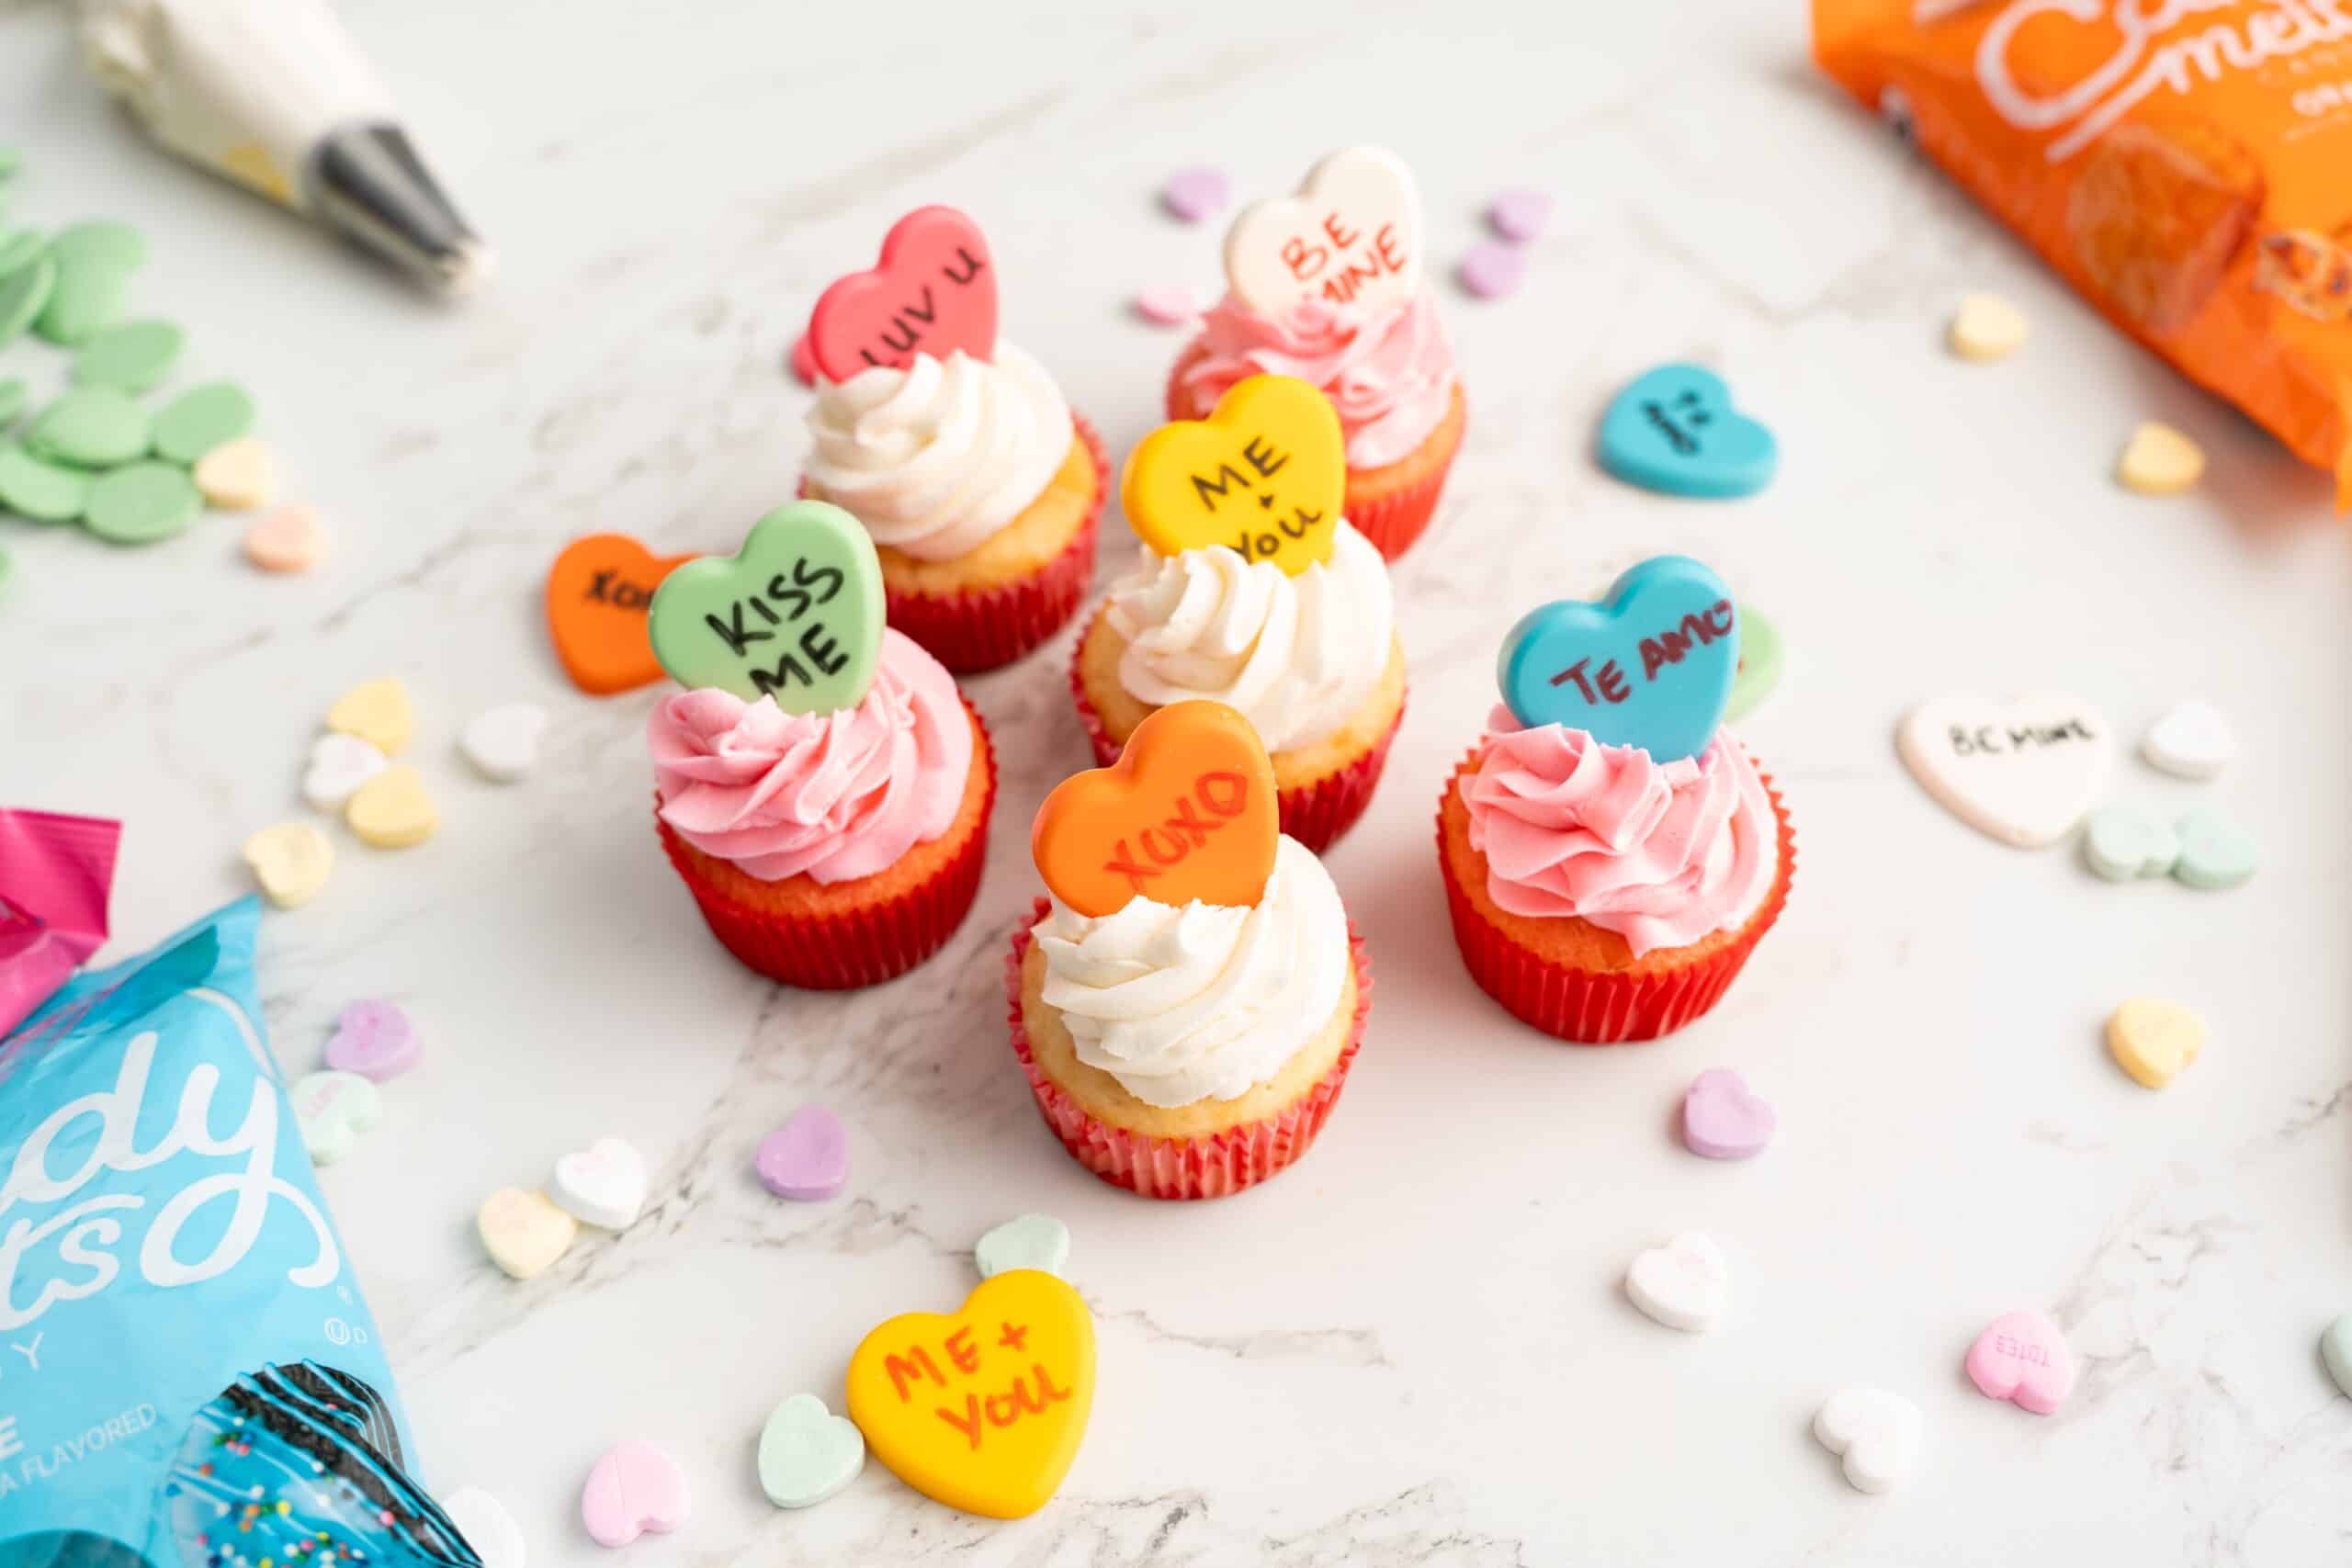 conversation hearts cupcakes (easy edible Valentine cupcake toppers)